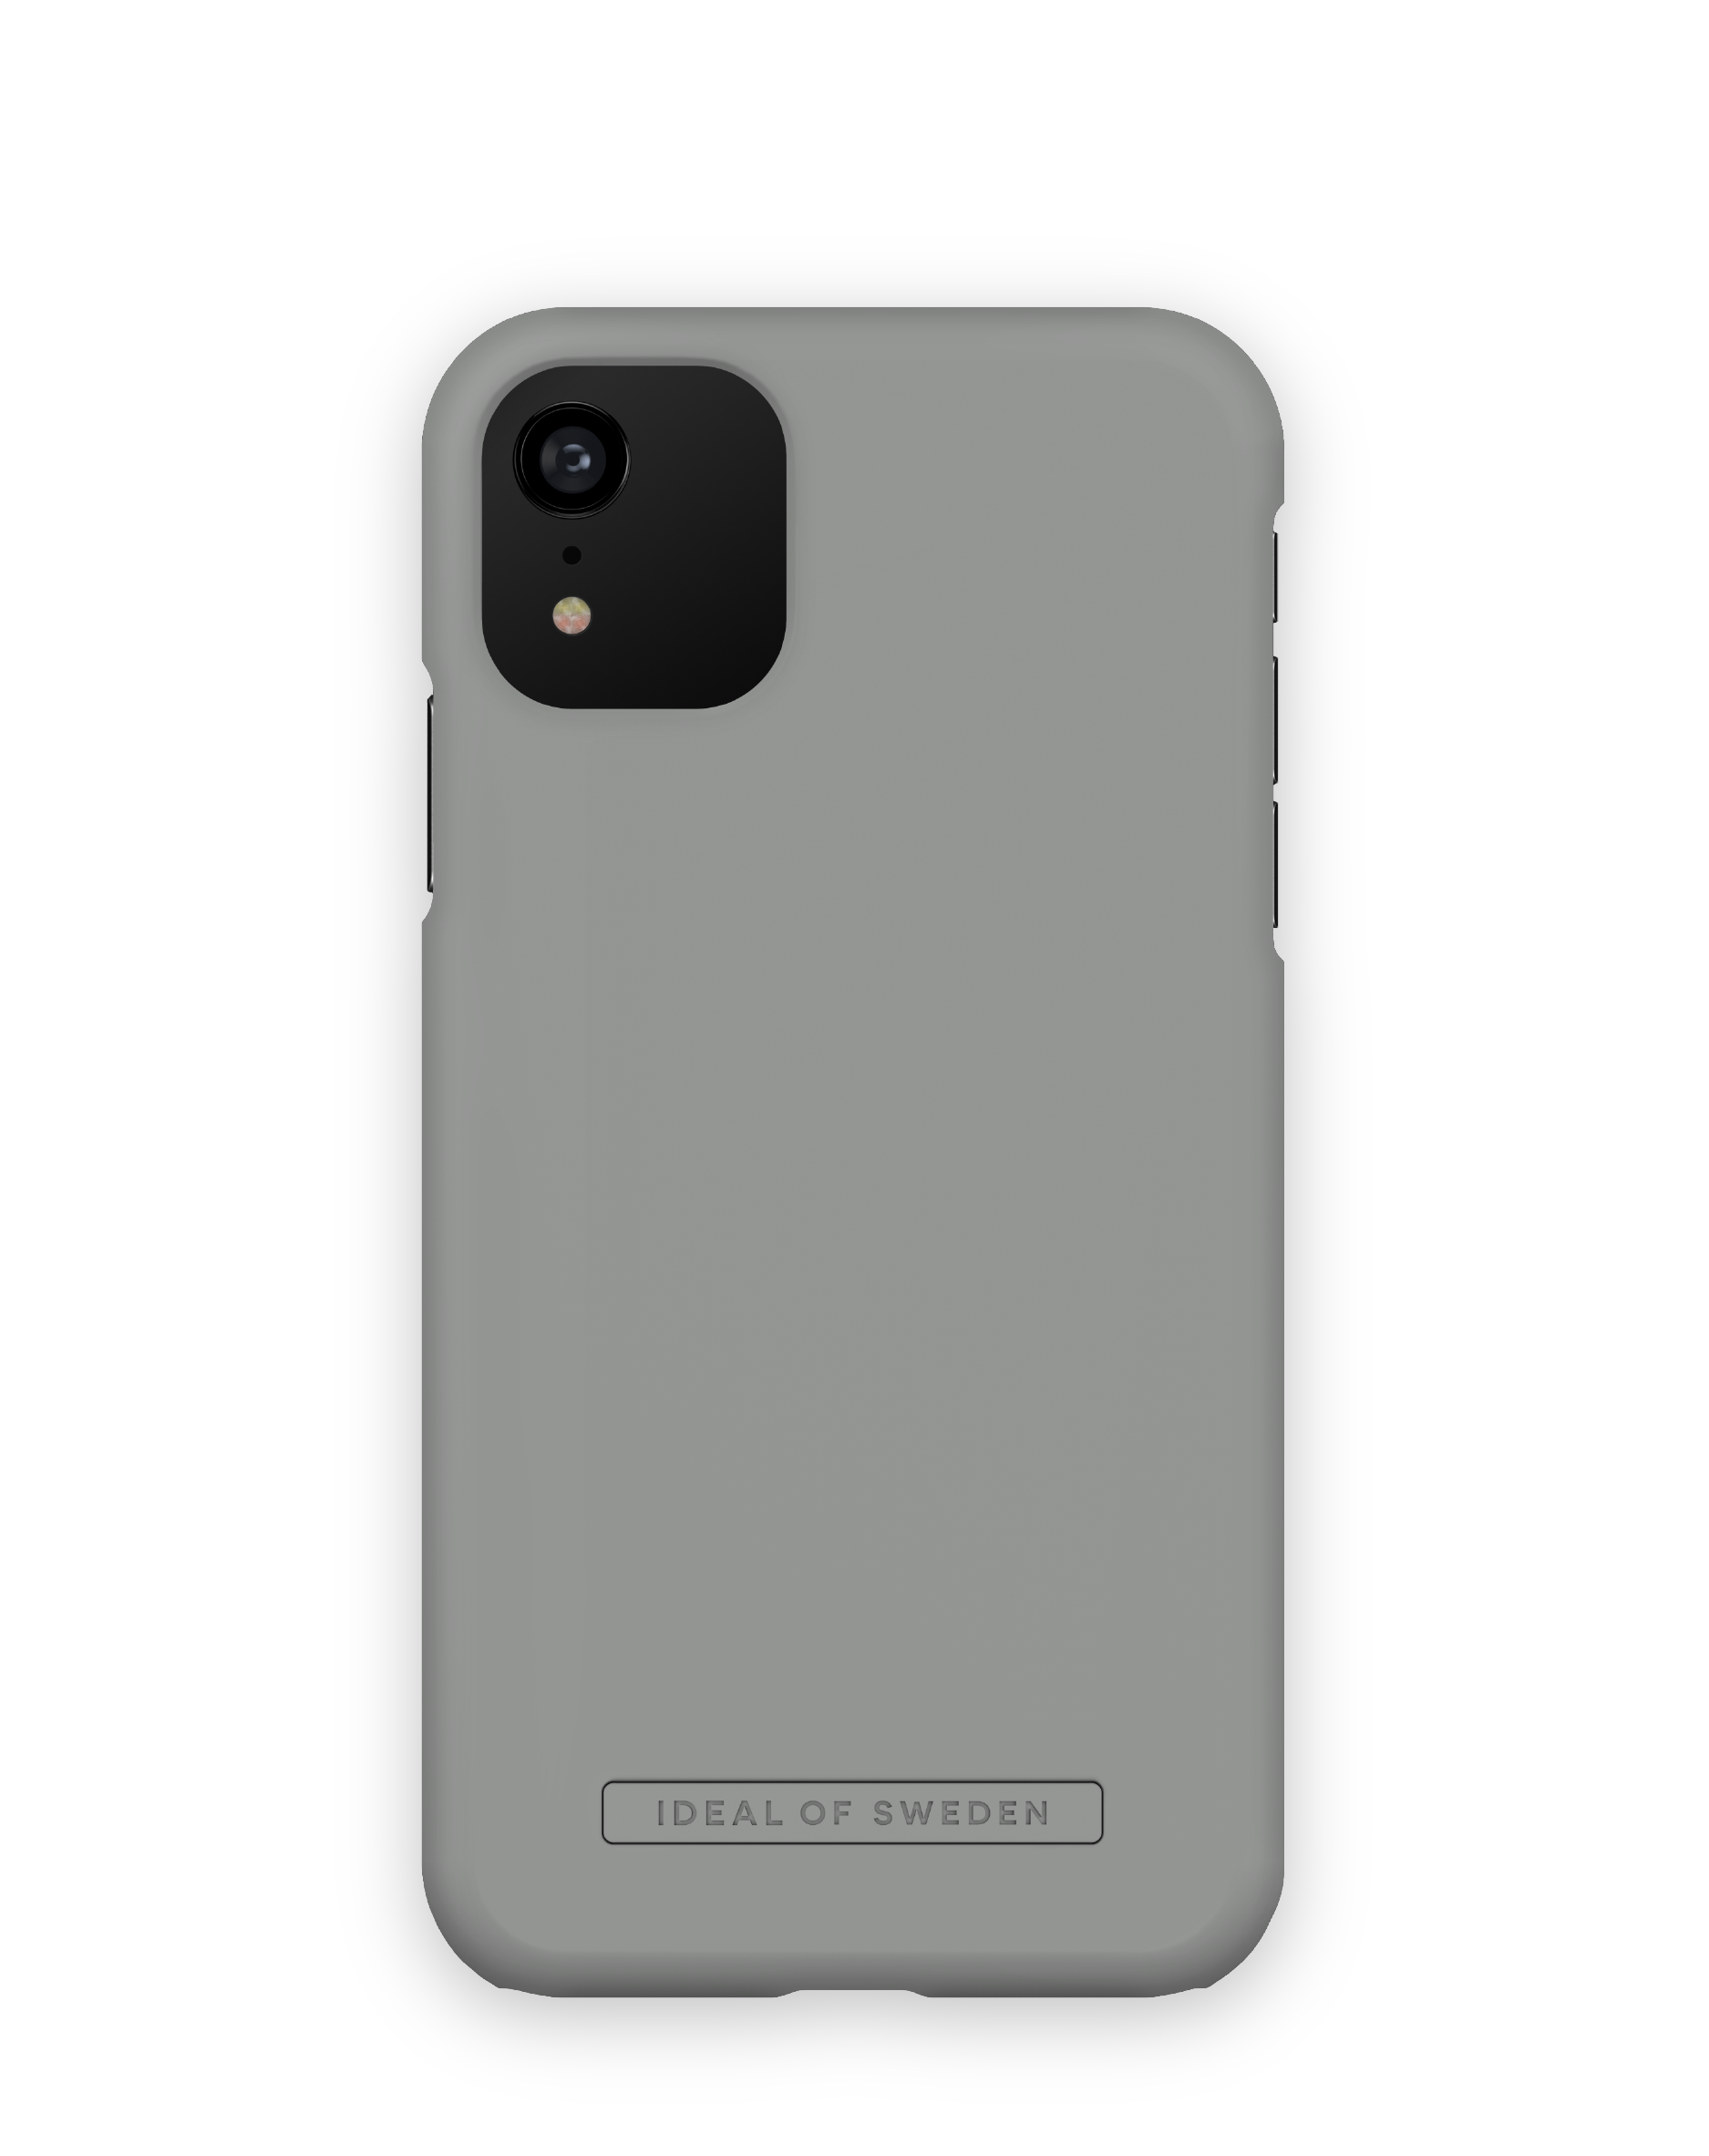 XR, Backcover, / Grey Apple, 11 Ash OF IDFCSS22-I1961-409, IDEAL iPhone iPhone SWEDEN